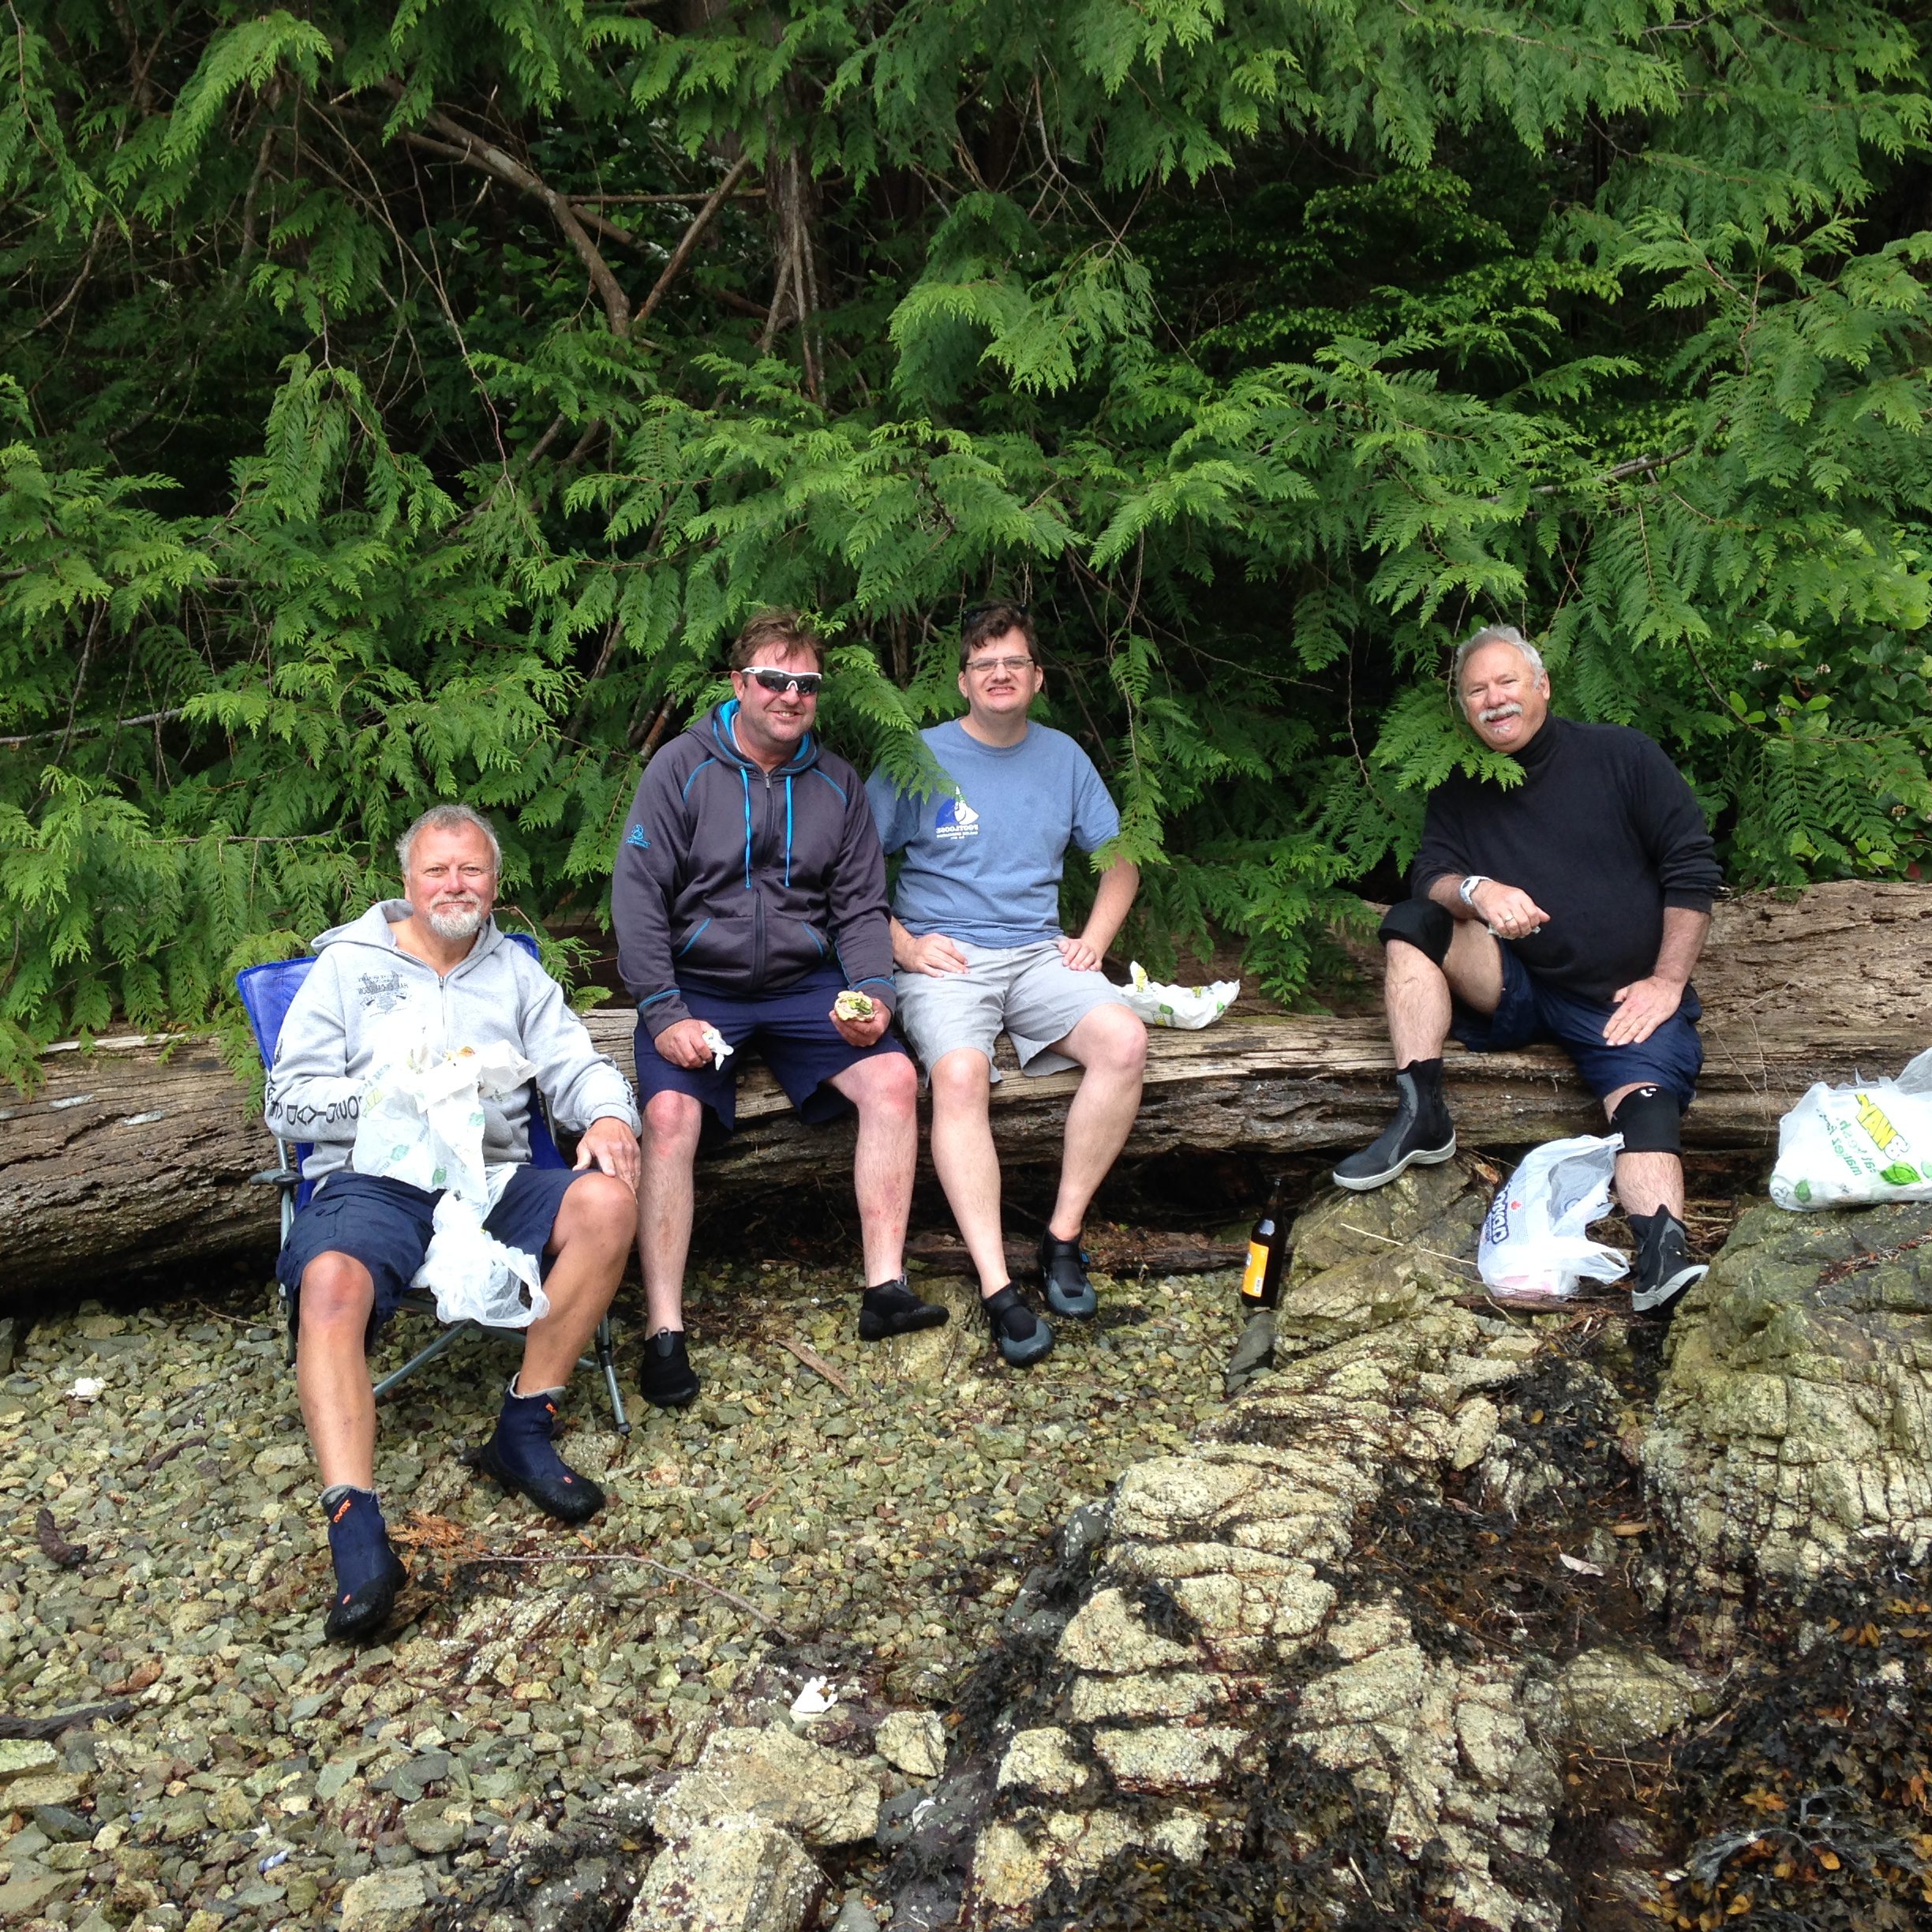 Thomas, Ken, Robert and Kevin on the late lunch break at the Sechelt Inlets Marine Provincial Park